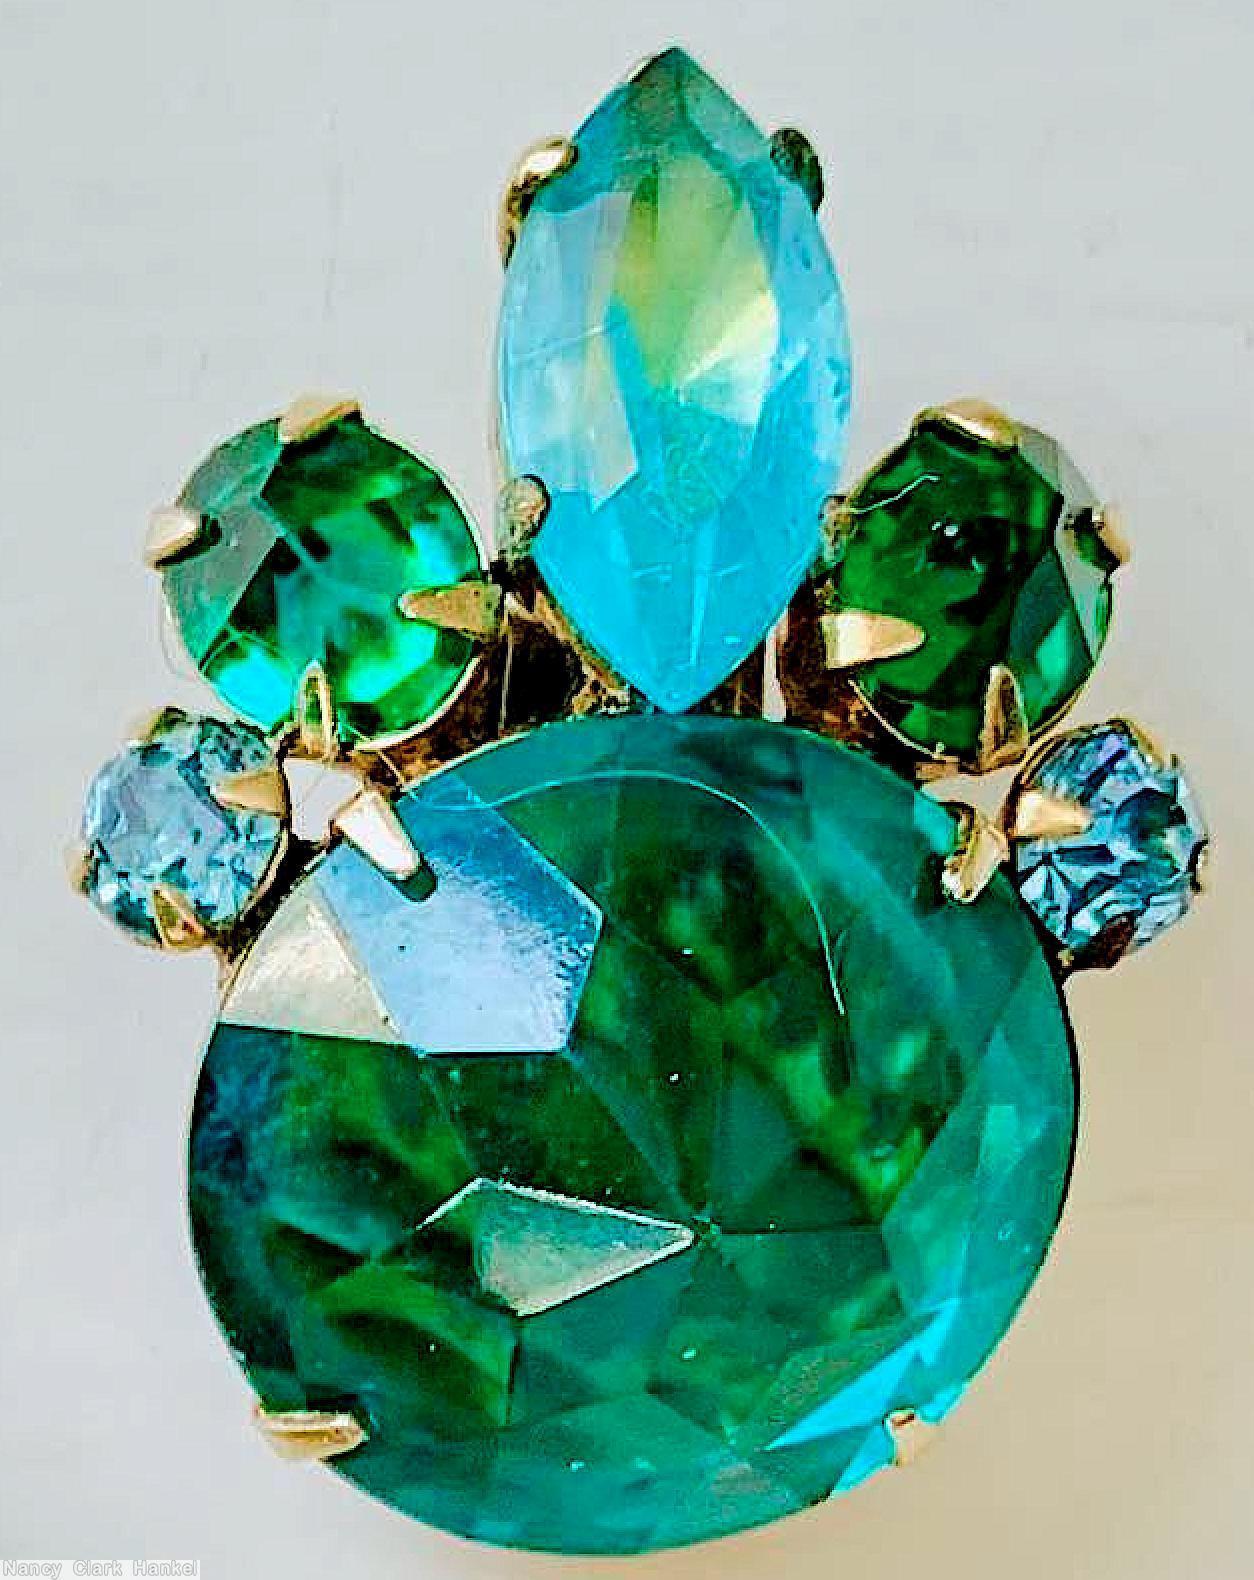 Schreiner asymmetric earring 1 large round inverted stone center 1 large navette 2 chaton 2 small chaton aqua green bicolor navette green faceted large round cab goldtone jewelry